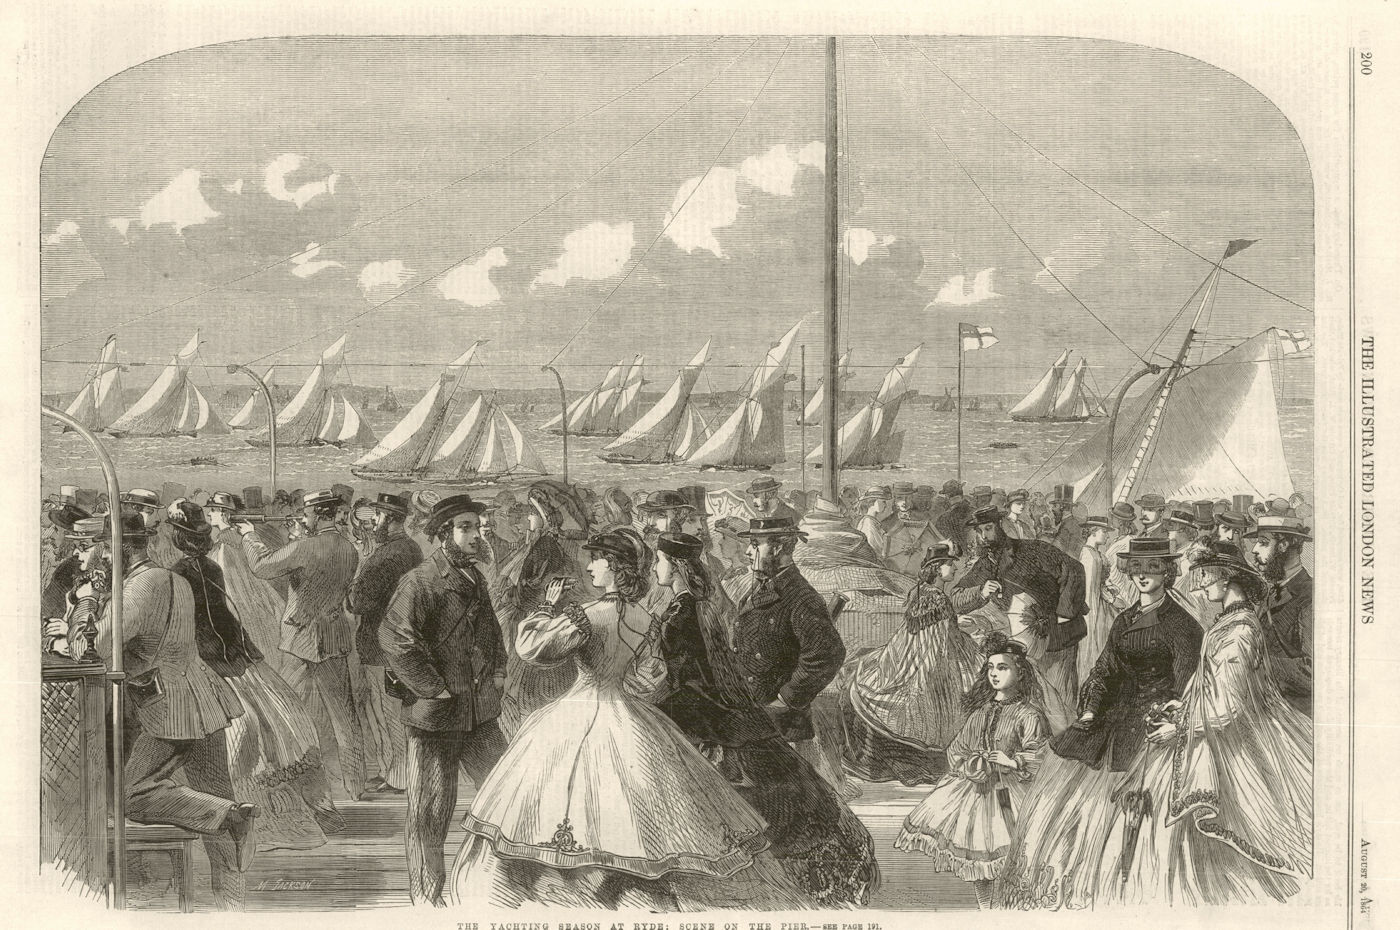 Associate Product The Yachting Season at Ryde: Scene on the Pier. Isle of Wight 1864 ILN print